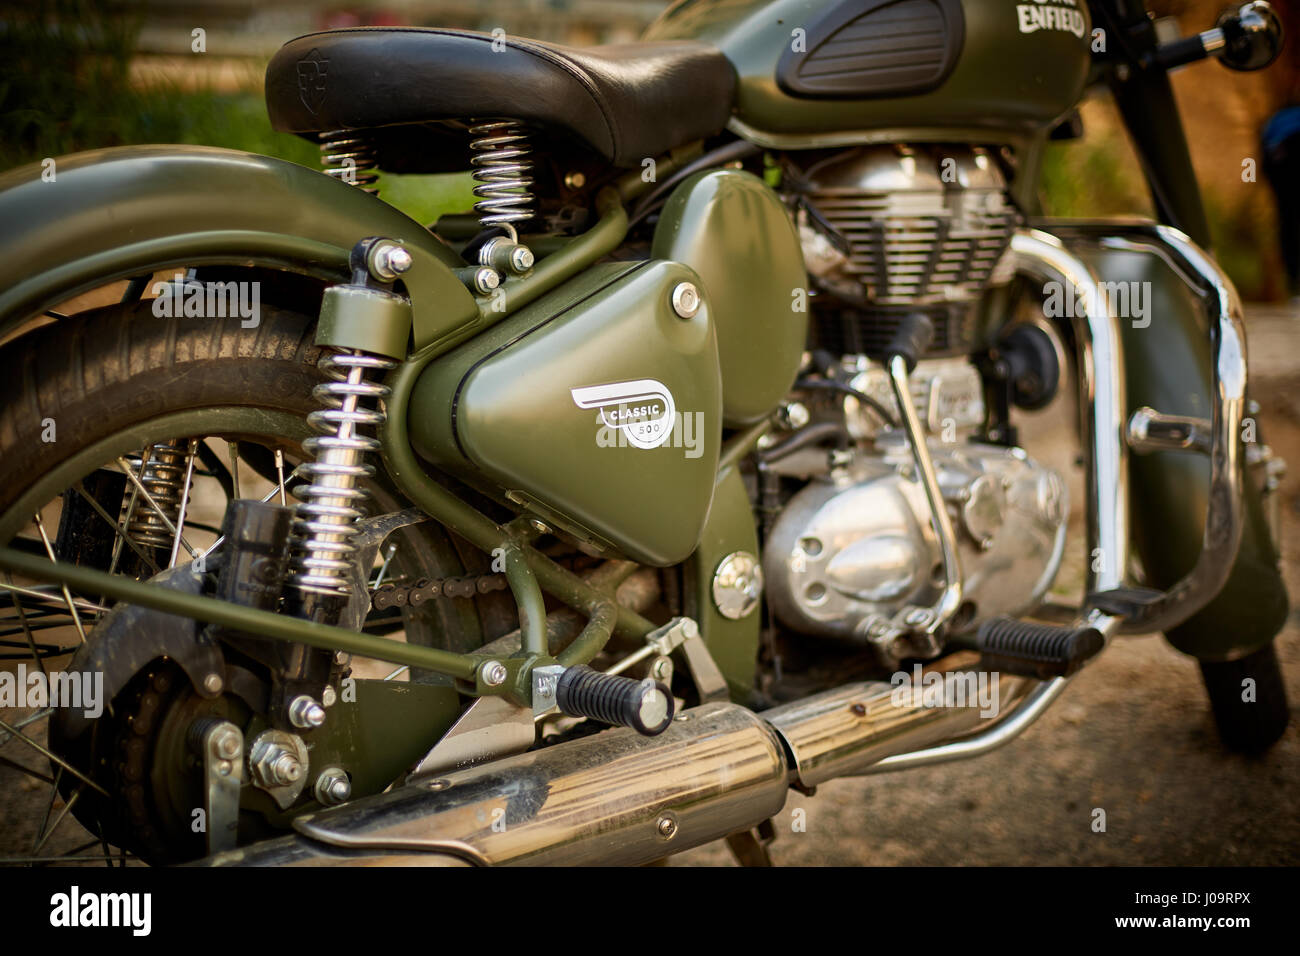 Details on a Royal Enfield Motorcycle Stock Photo